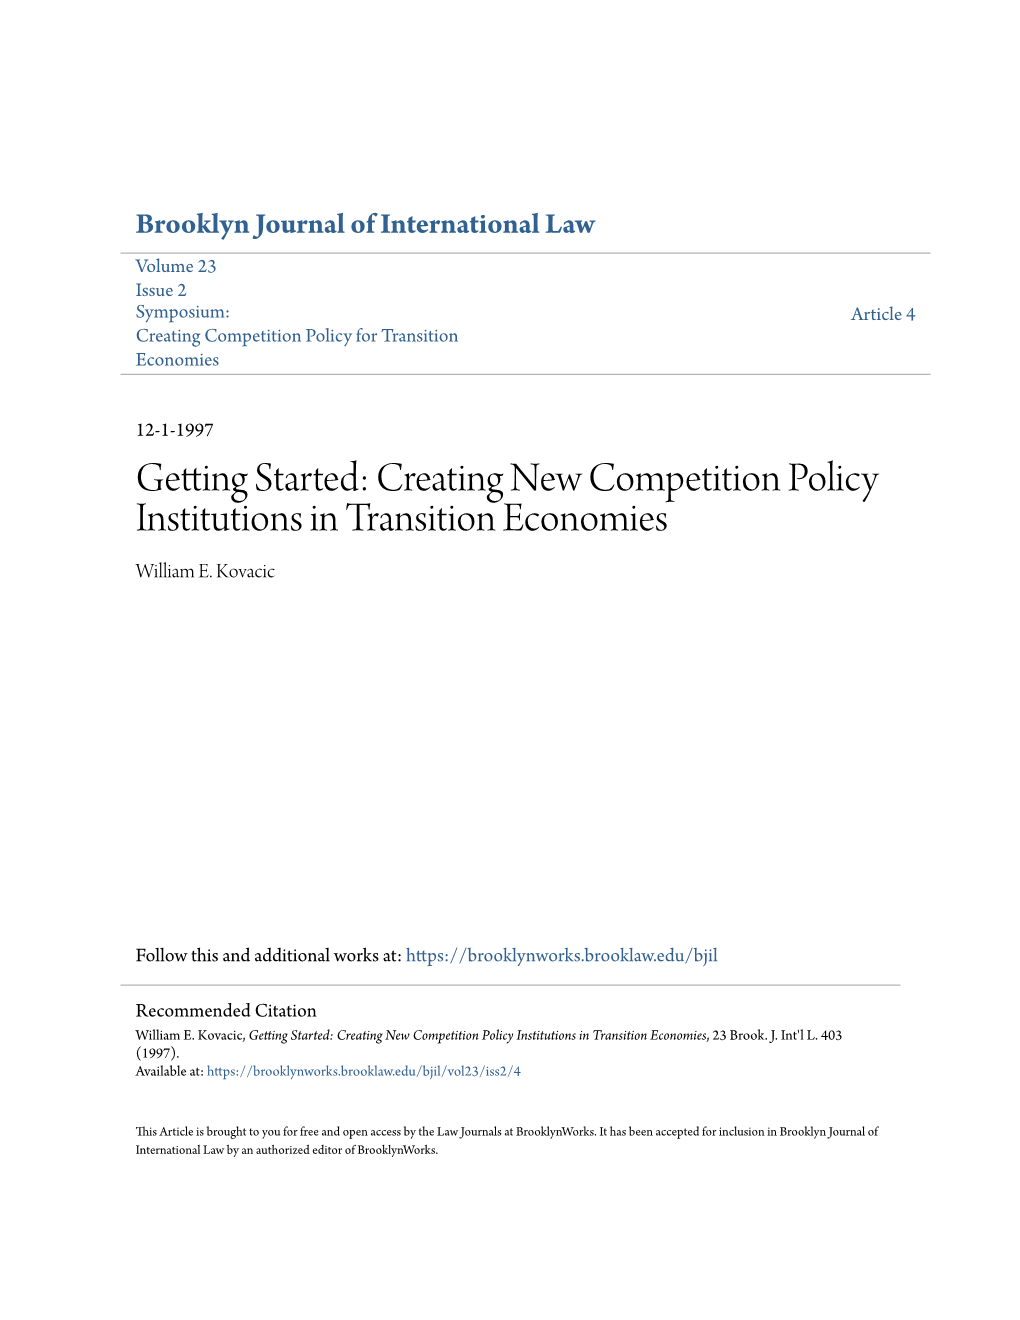 Getting Started: Creating New Competition Policy Institutions in Transition Economies William E